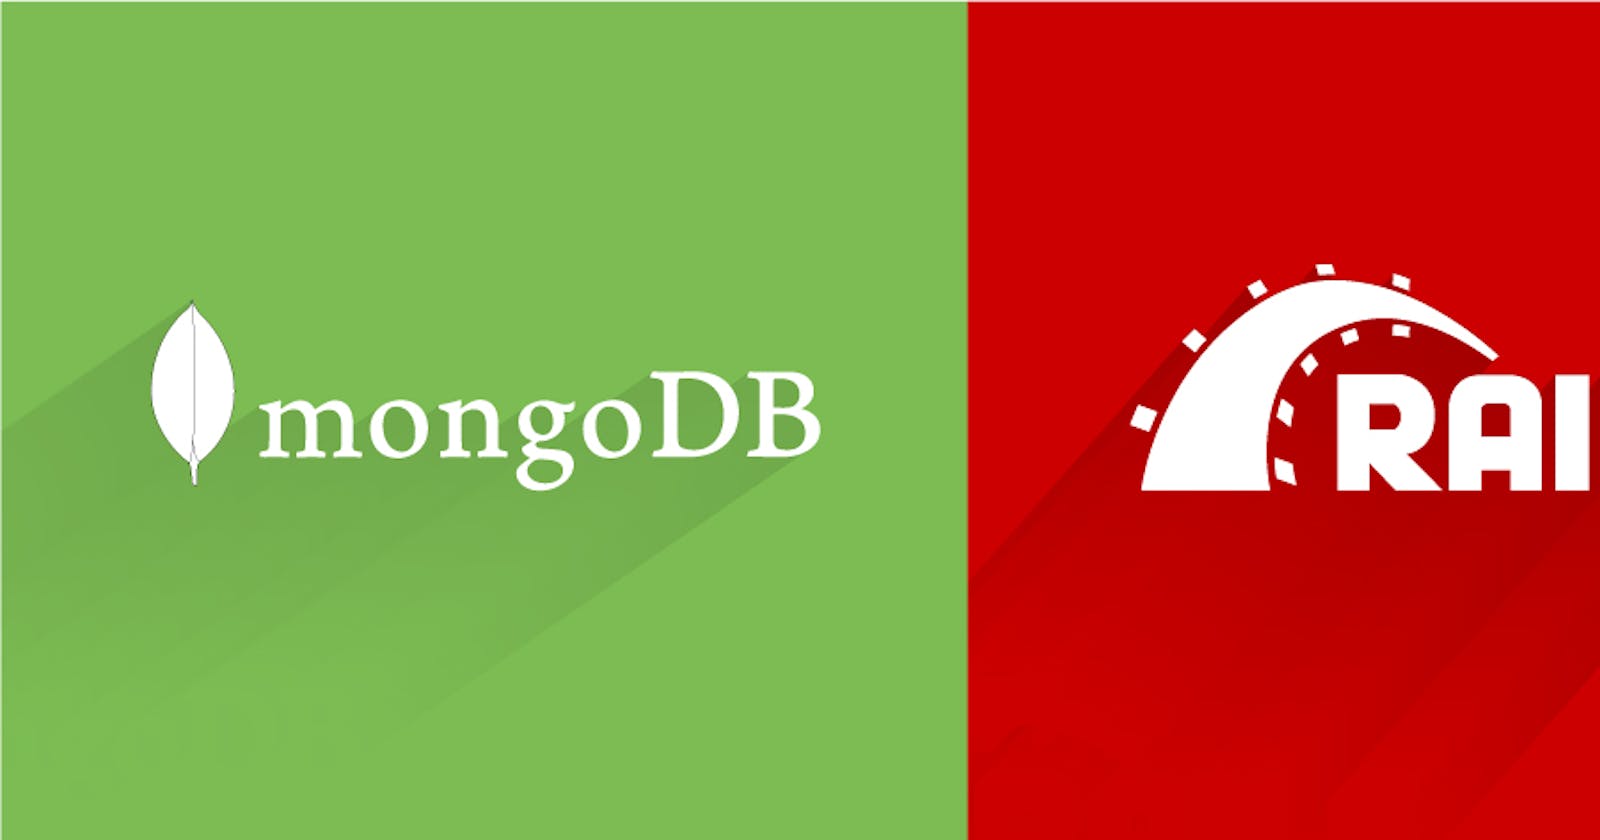 Setting up Ruby on Rails 5 app with MongoDB in 10 minutes